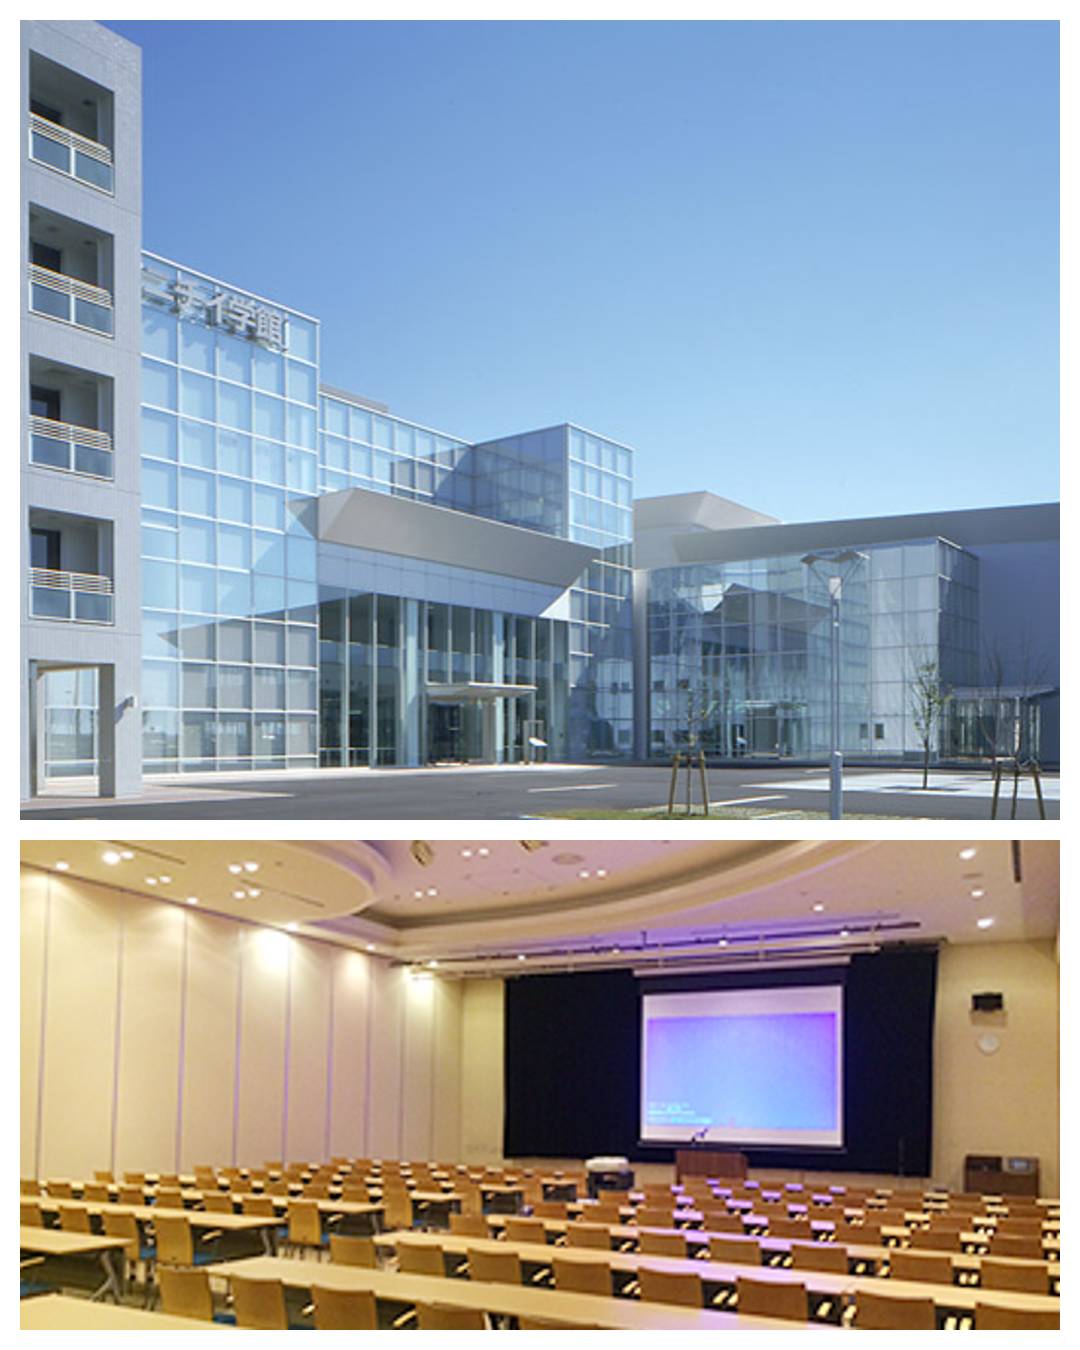 at top there is a paneled glass 
        exterior of the conference center and, at bottom there is a lecture hall with a large screen and rows of seating